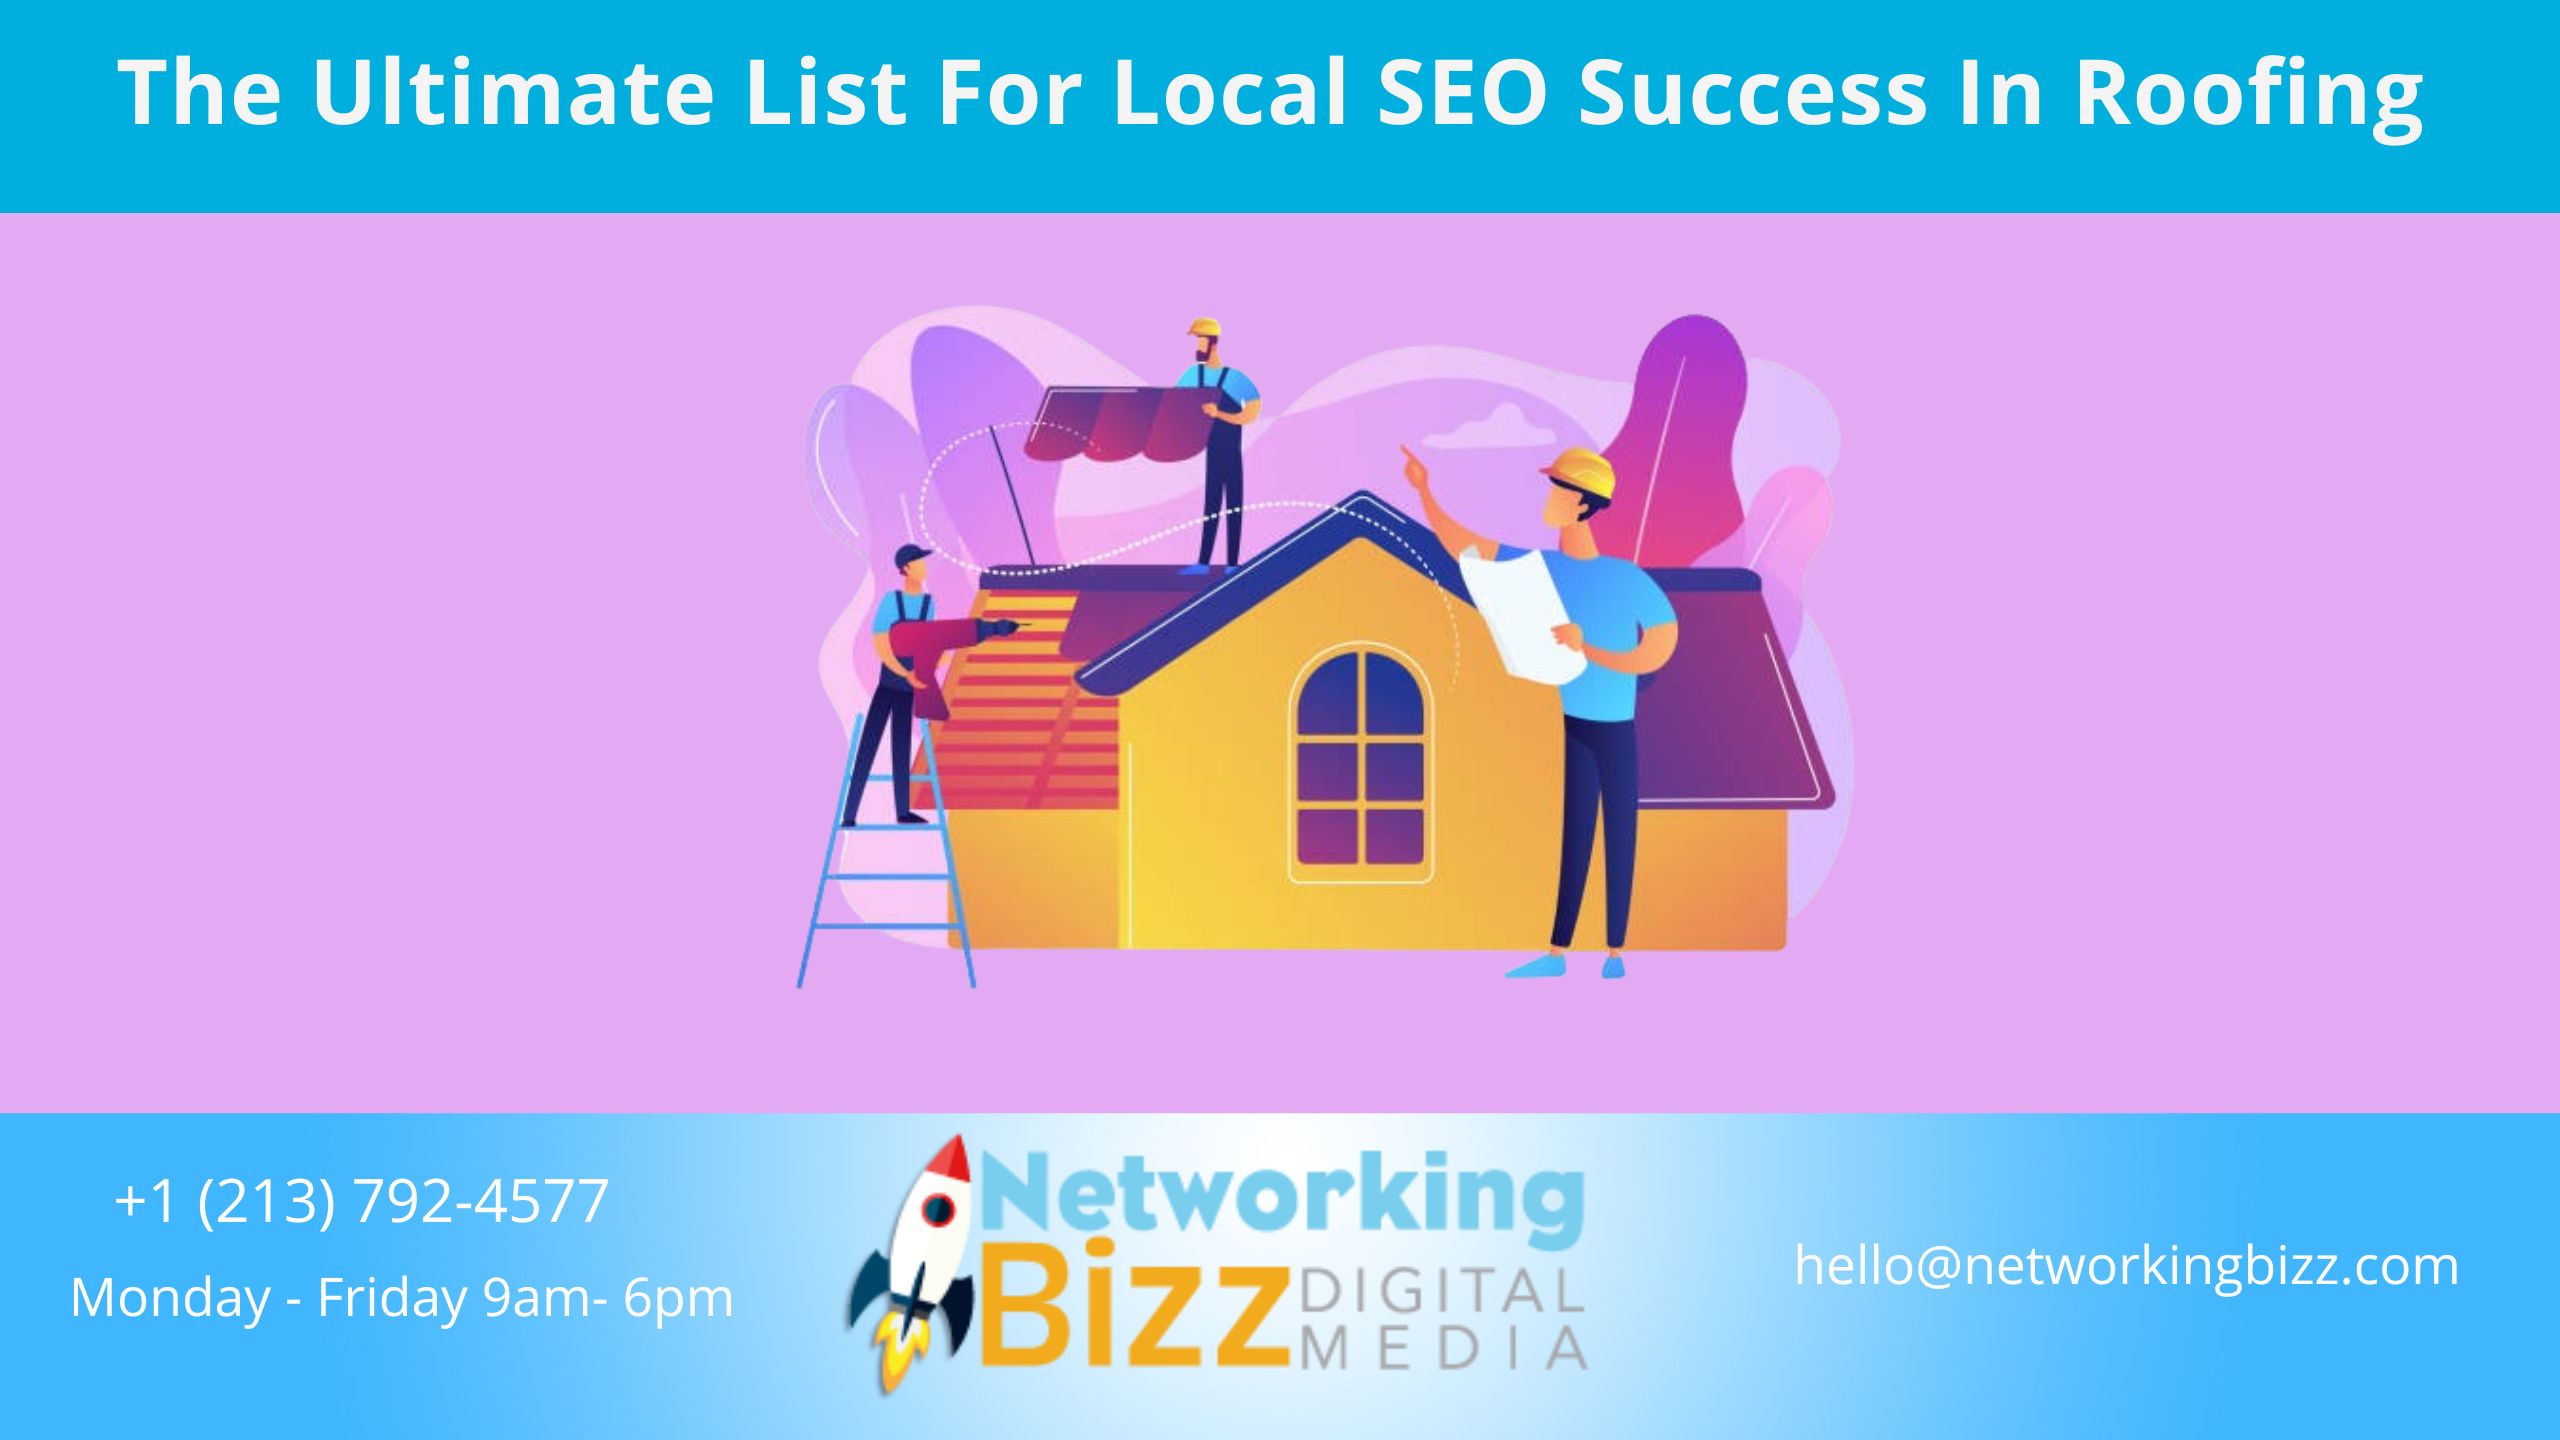 The Ultimate List For Local SEO Success In Roofing